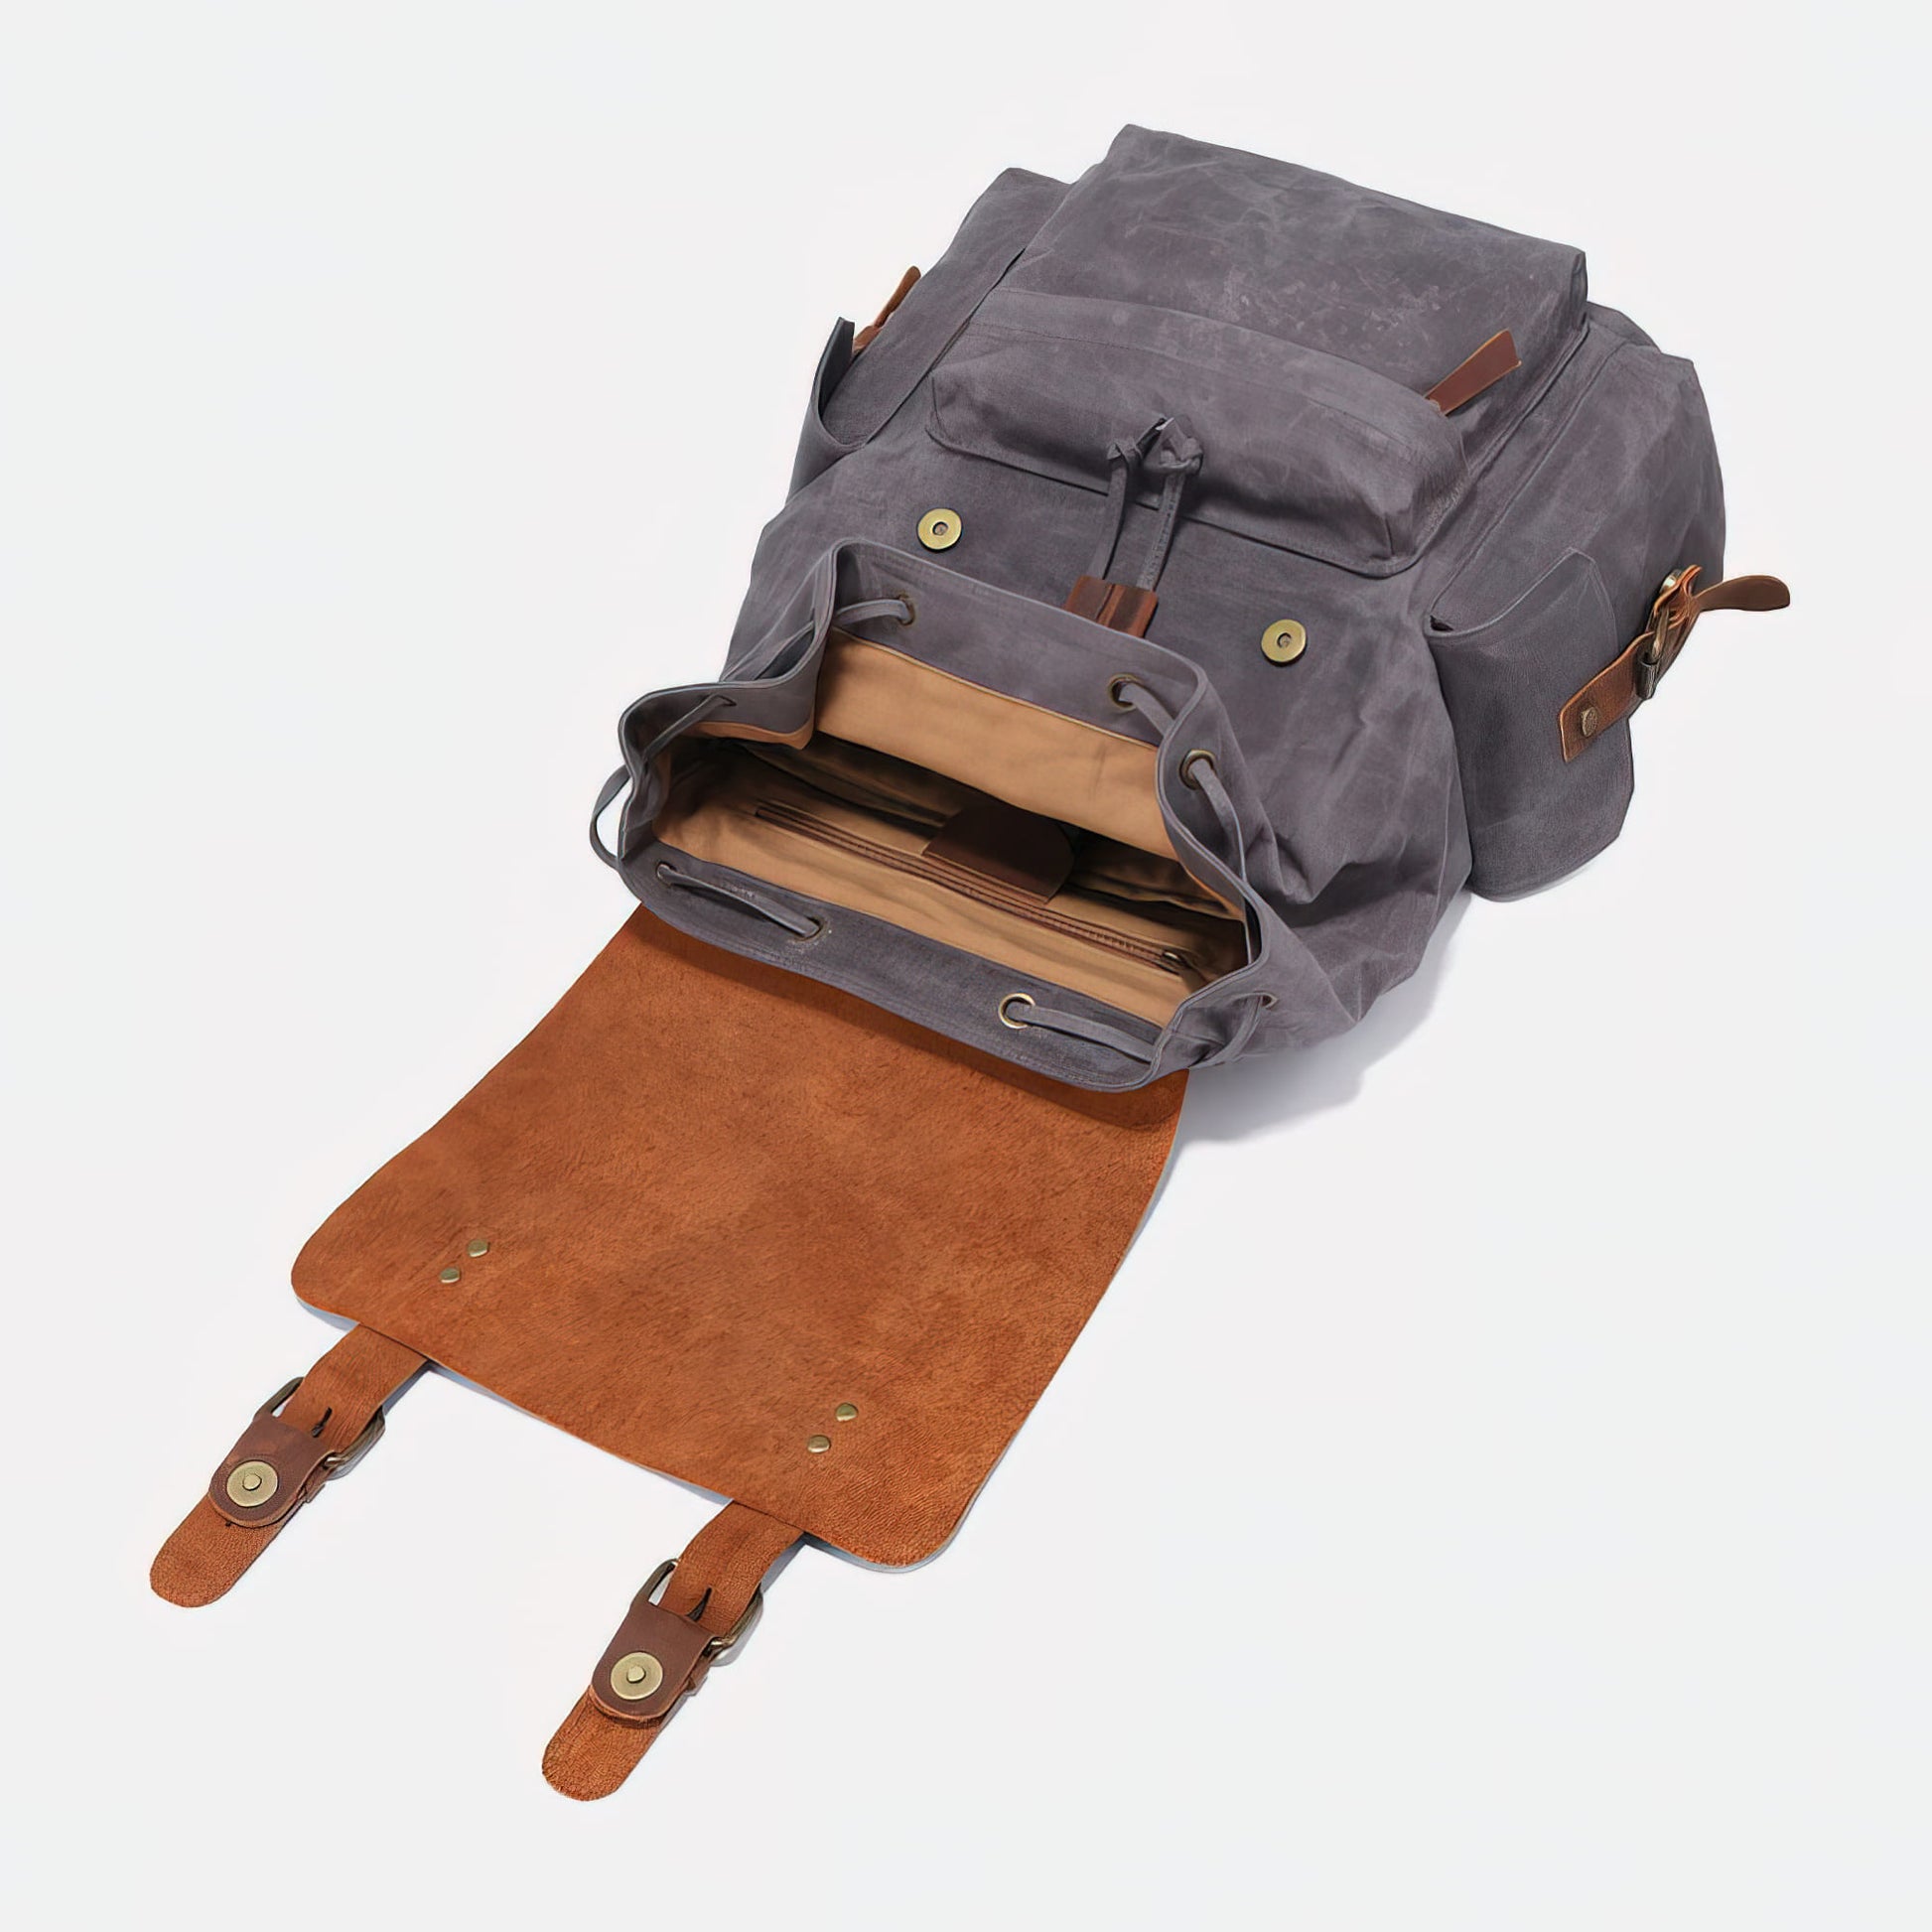 Large Waxed Canvas Leather Backpack